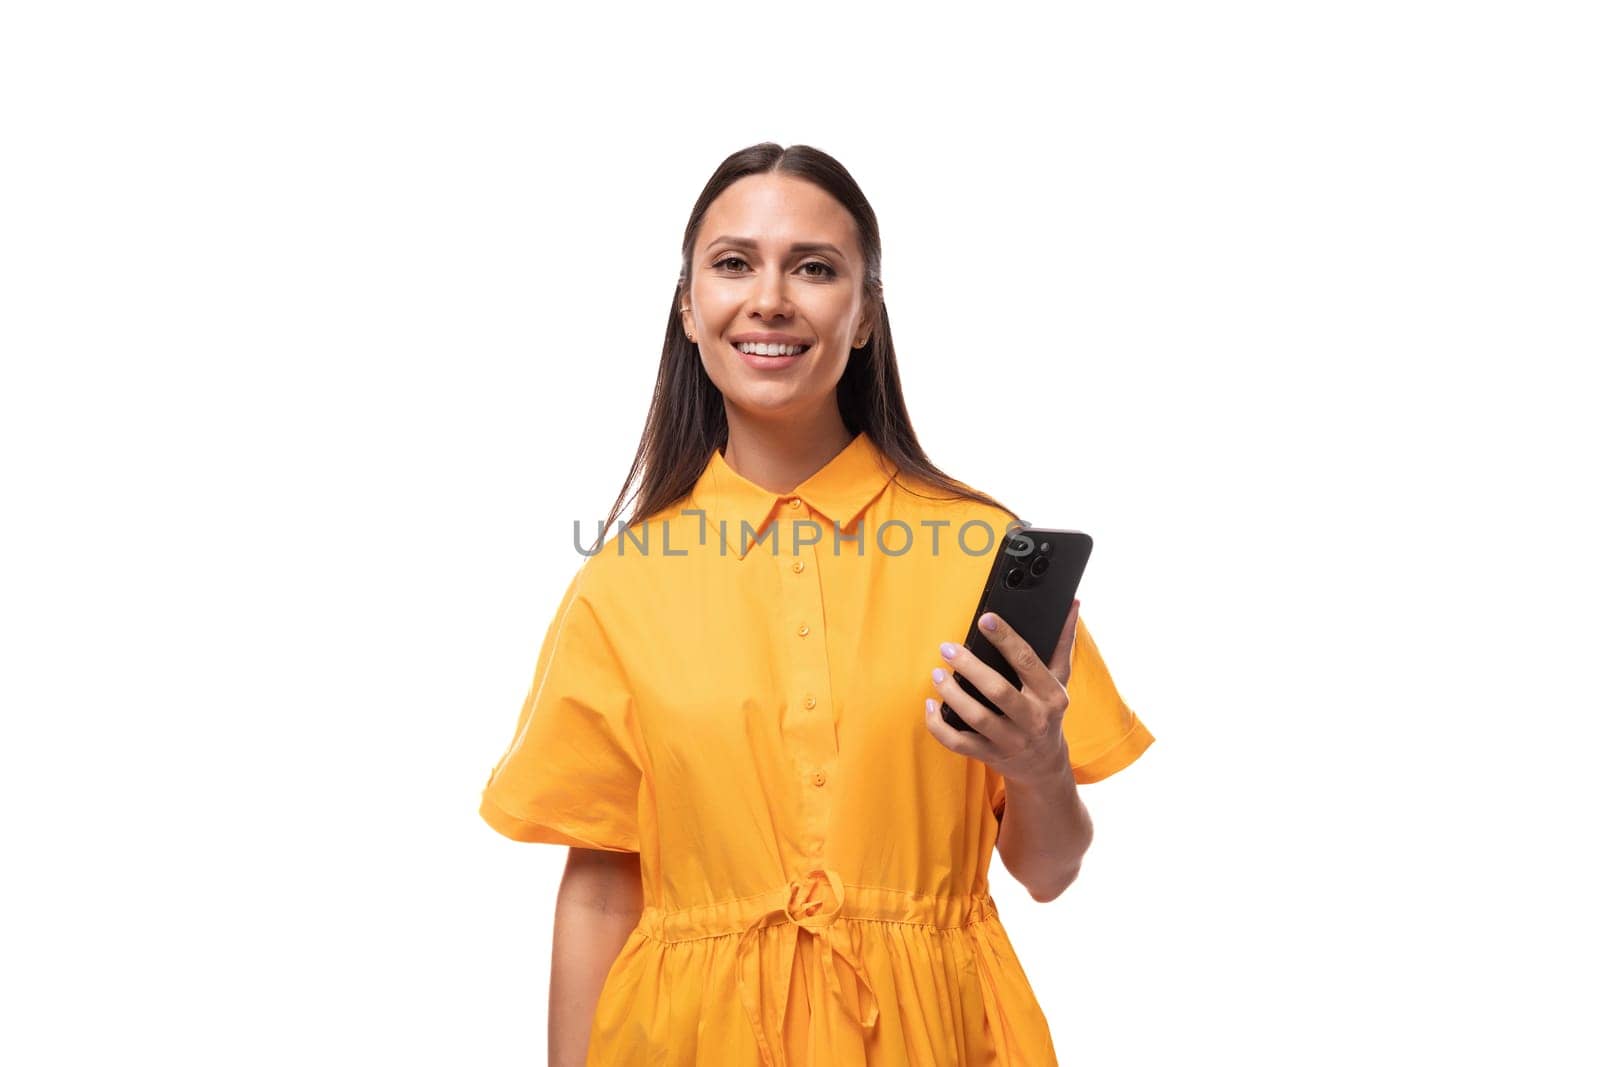 european young woman with black hair dressed in an orange summer dress on vacation holding a smartphone.